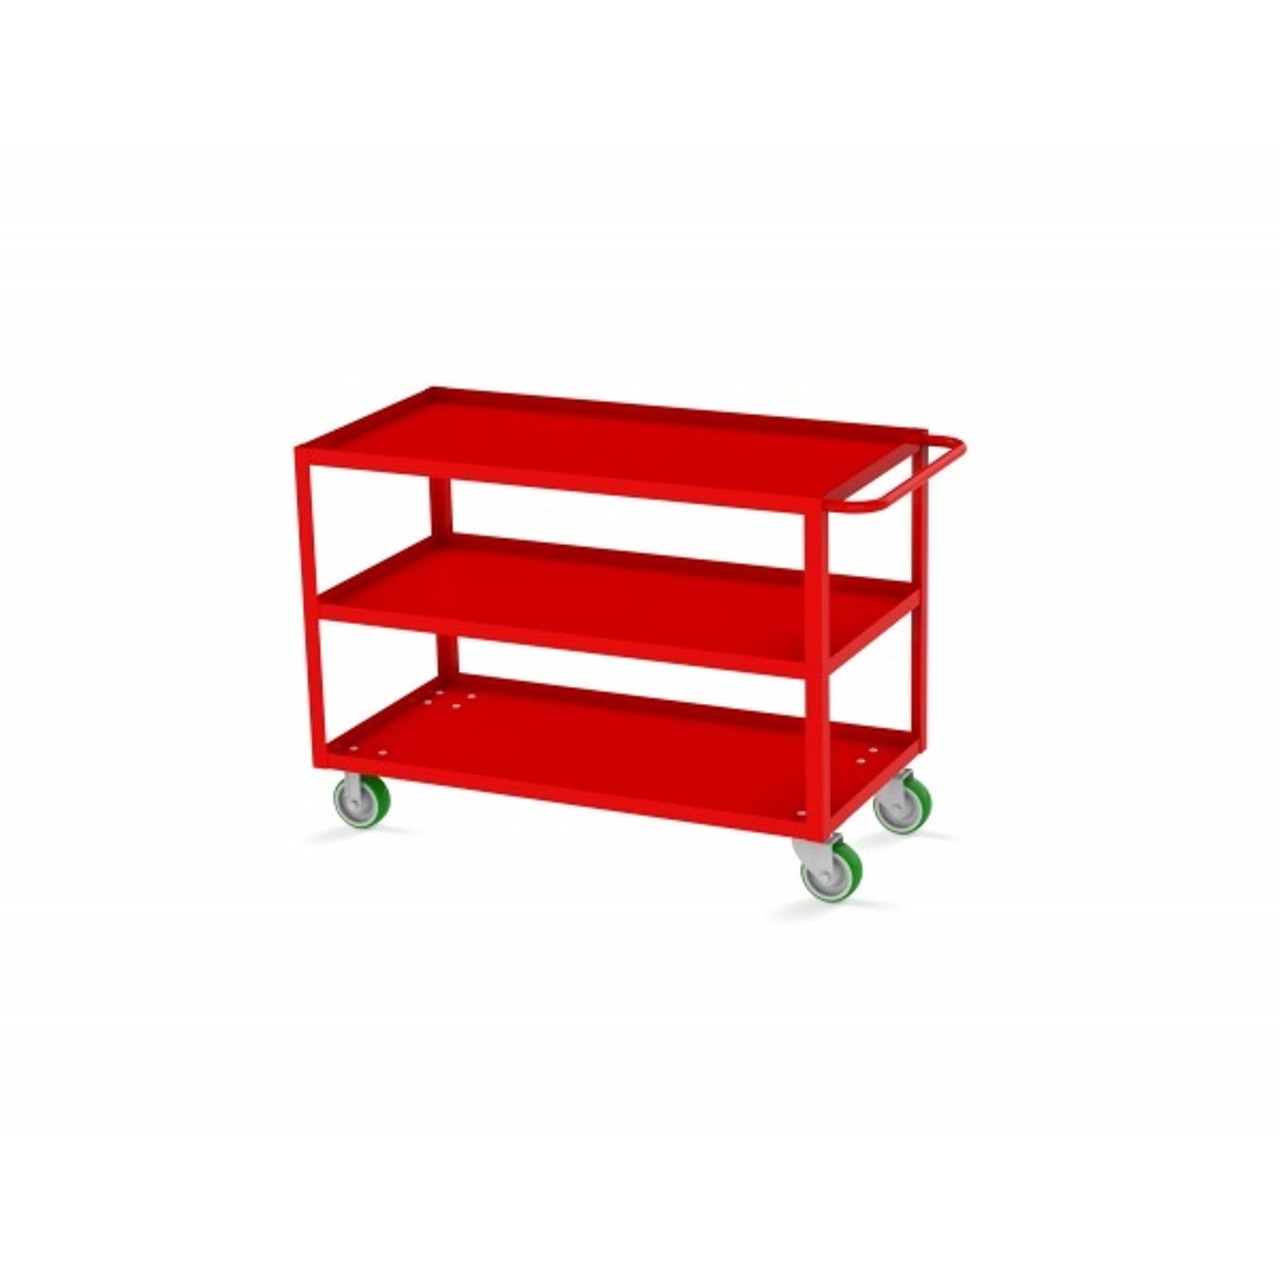 Valley Craft Three Shelf 24 x 48" Utility Cart, Red with Poly Casters (CALL FOR BEST PRICING)